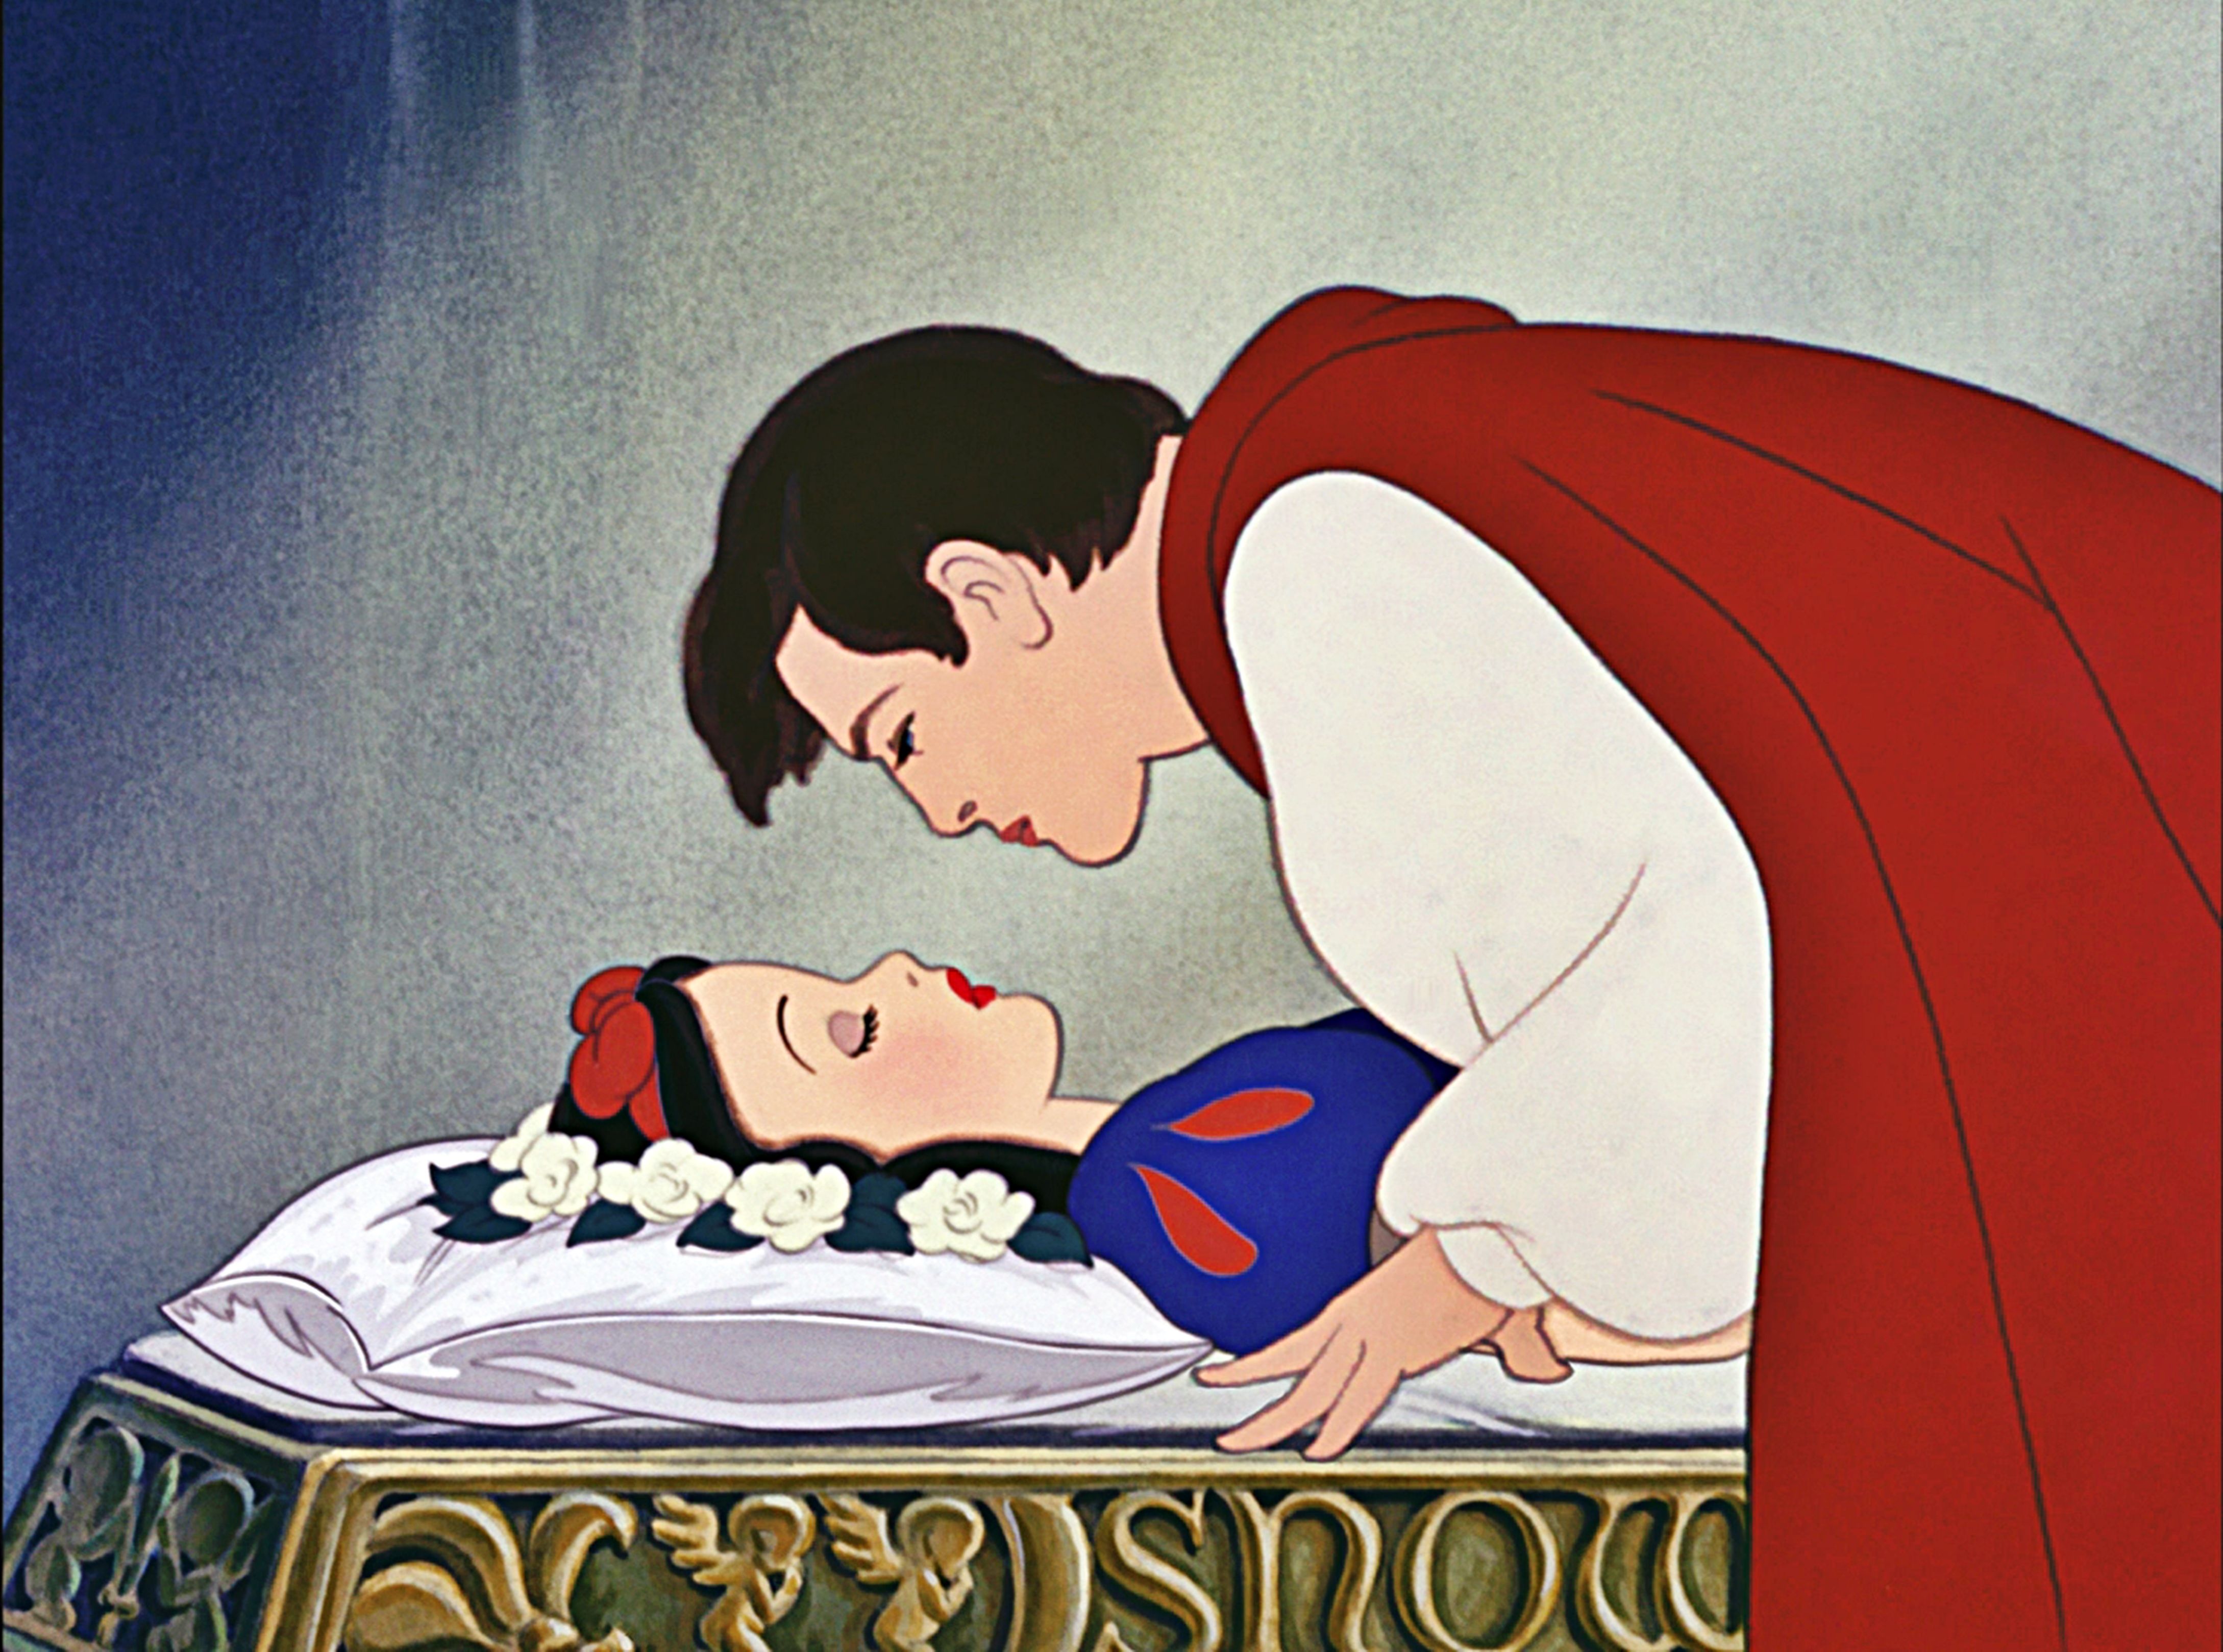 Now you can date fellow Disney fans thanks to this GENIUS dating site